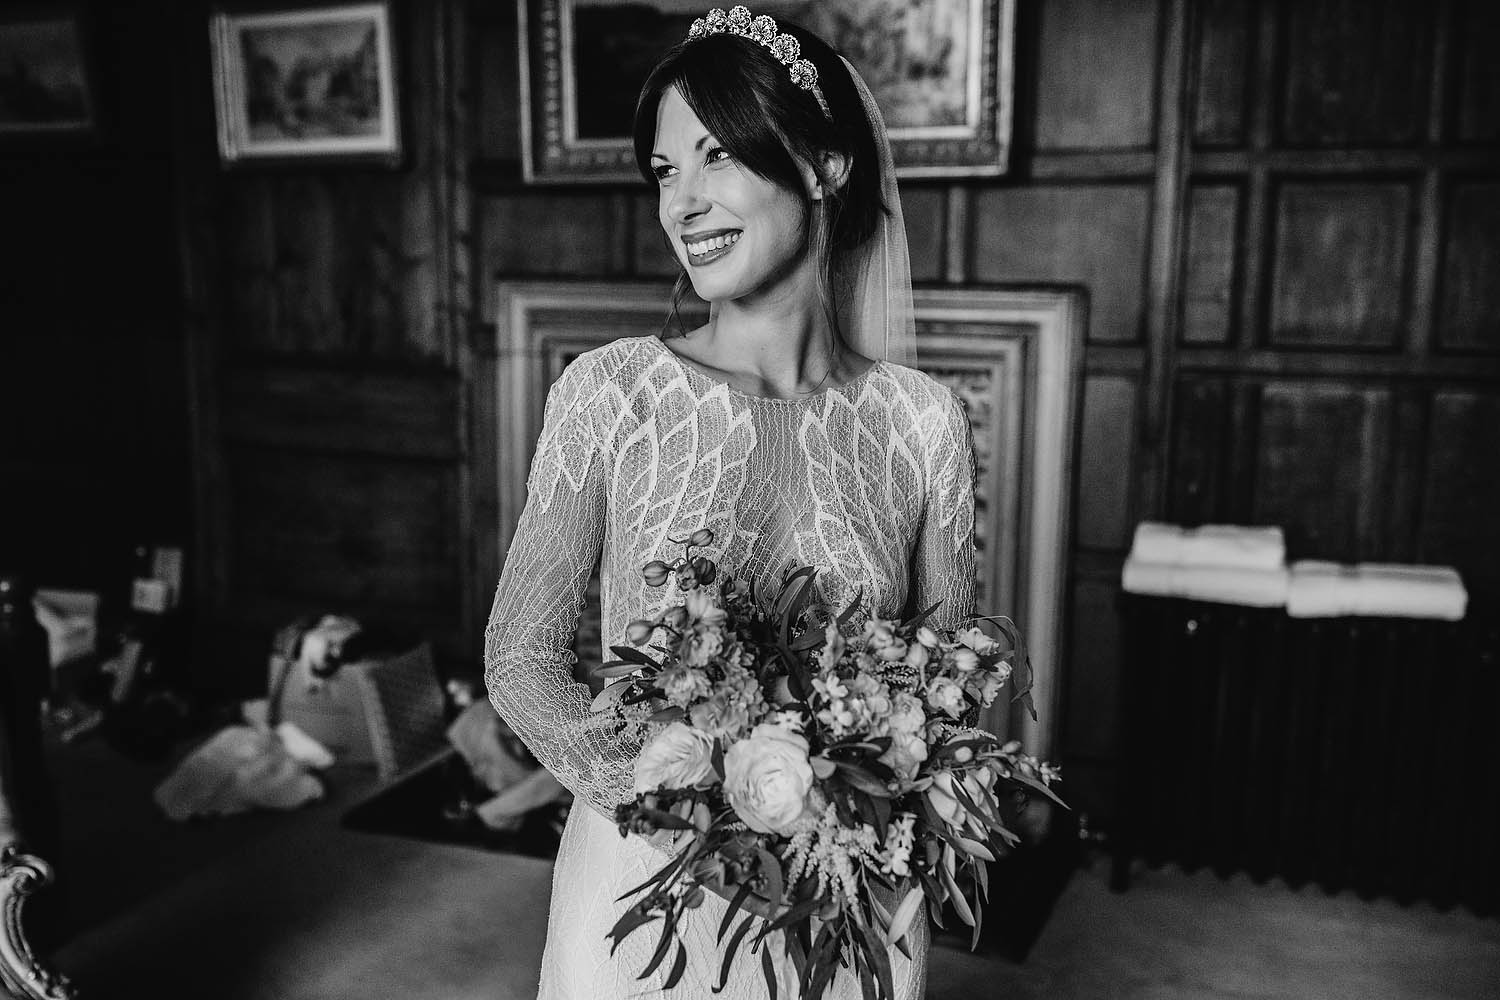 B&W image of bride smiling holding bouquet